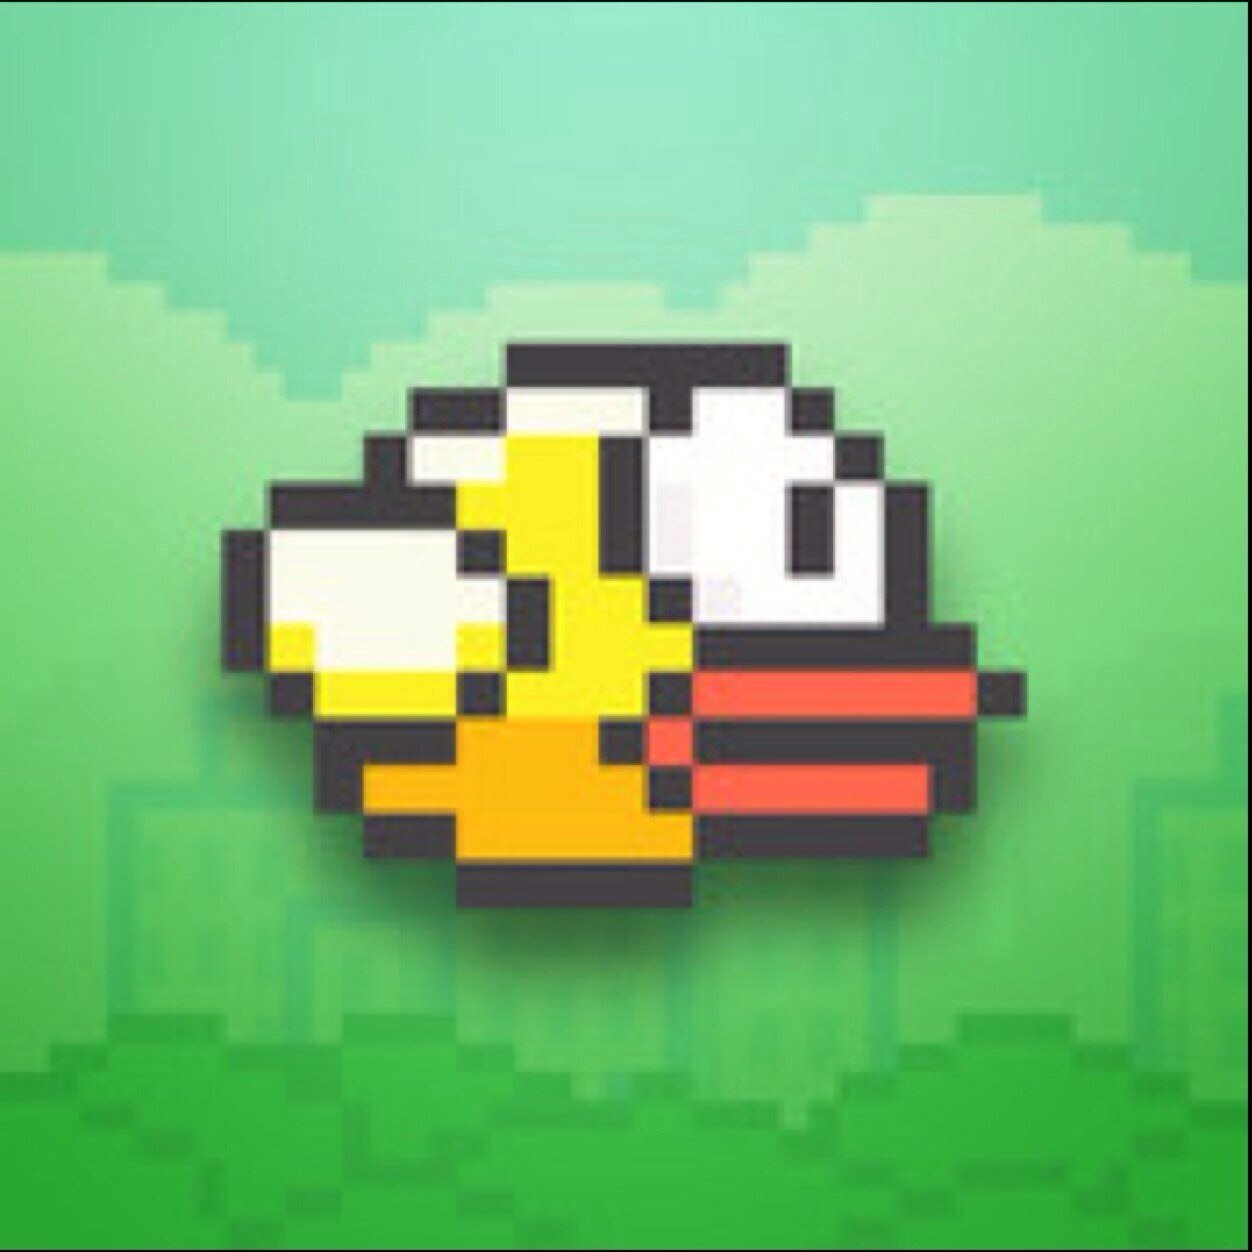 we all gotta admit flappy bird can be poop sometimes.